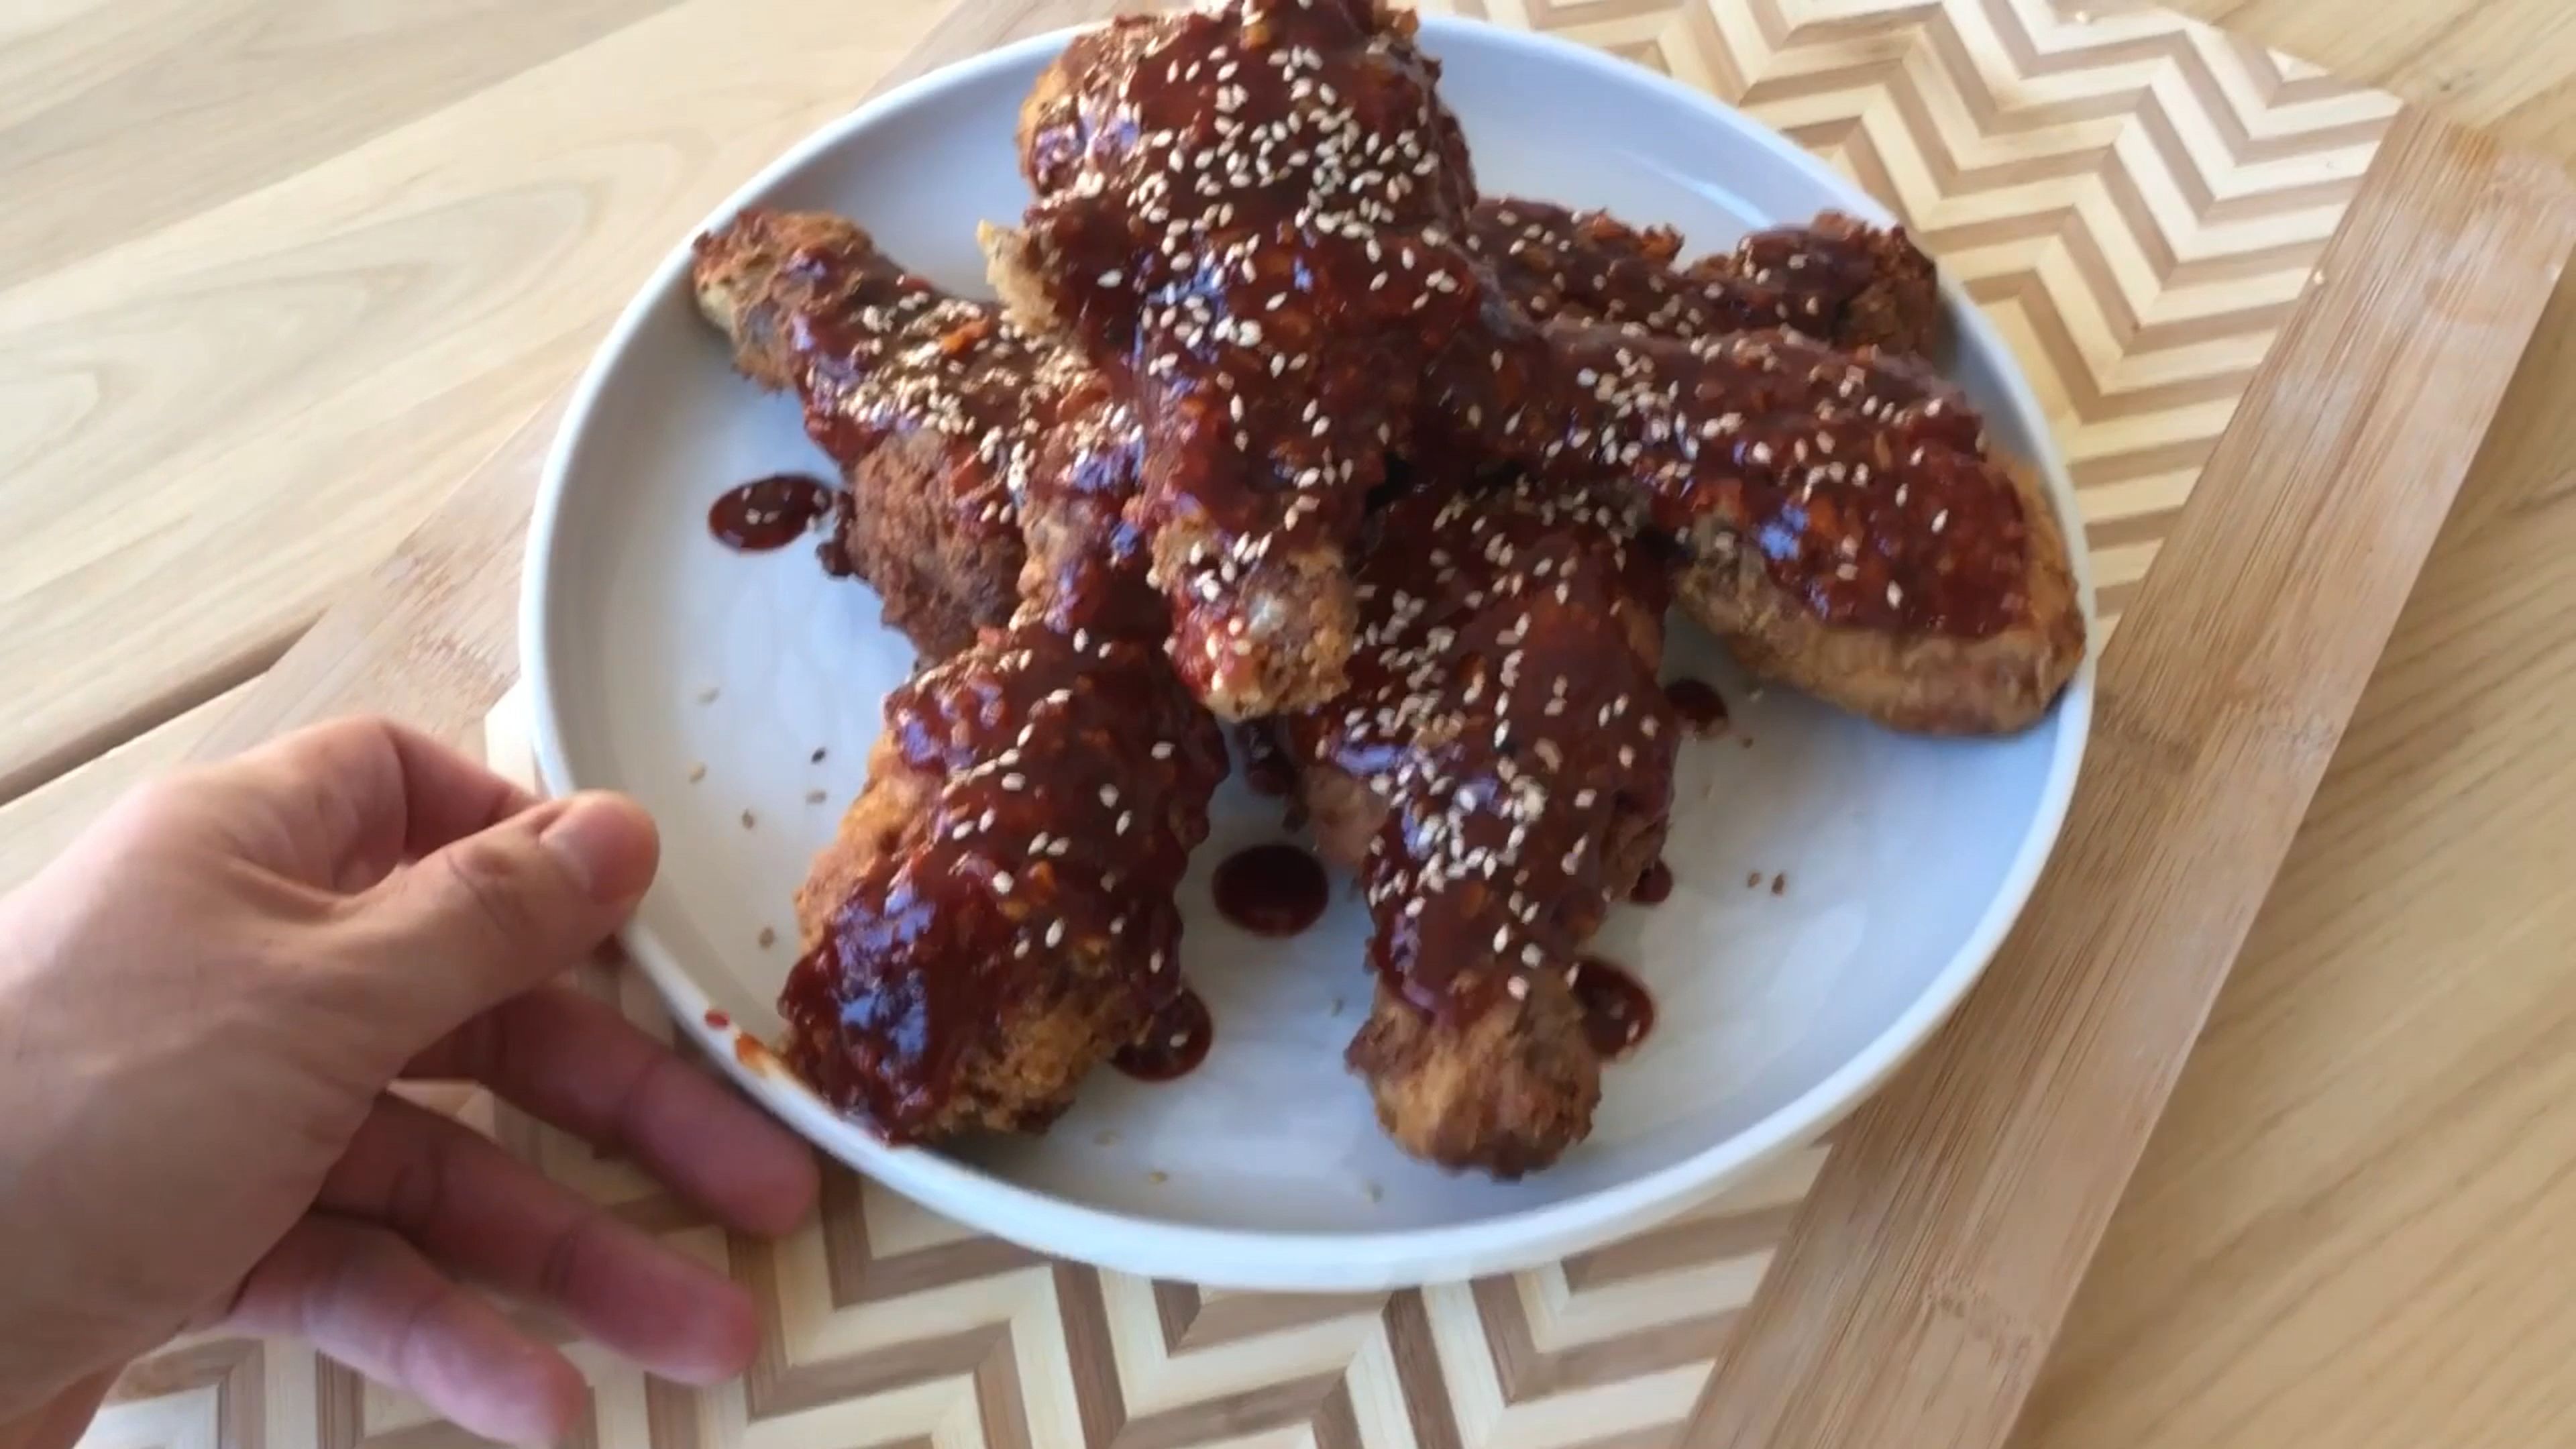 Take the fried chicken and toss it in a large bowl with the sauce until coated evenly. Of you can drizzle the sauce over the chicken. Once plated, sprinkle some sesame seeds over the fried chicken and enjoy!! PS: this fried chicken goes perfectly with an ice cold beer :)